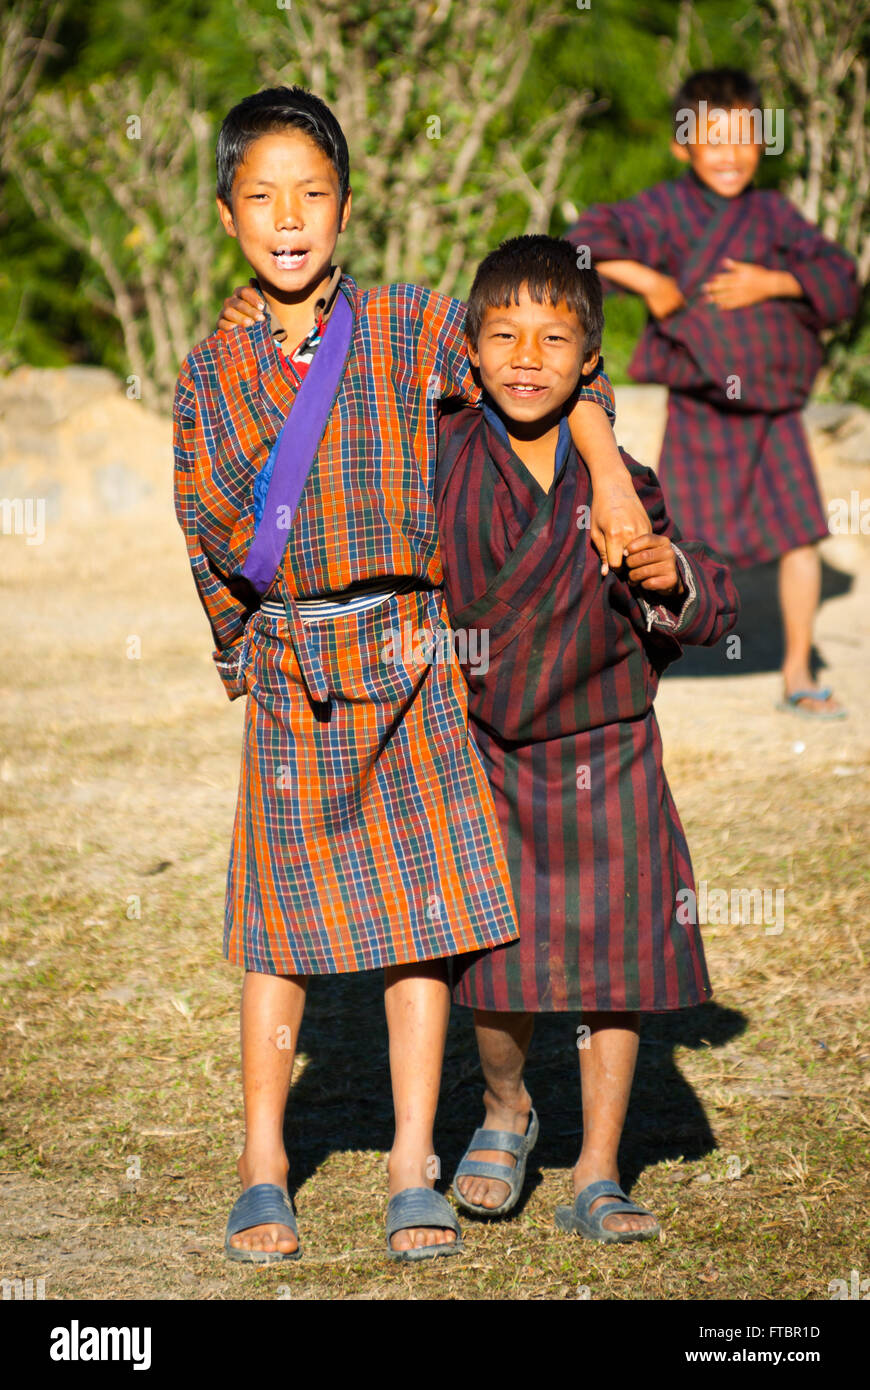 Young Bhutanese boys wearing traditional striped gho (robe) in Nimshong Village, southern Bhutan Stock Photo